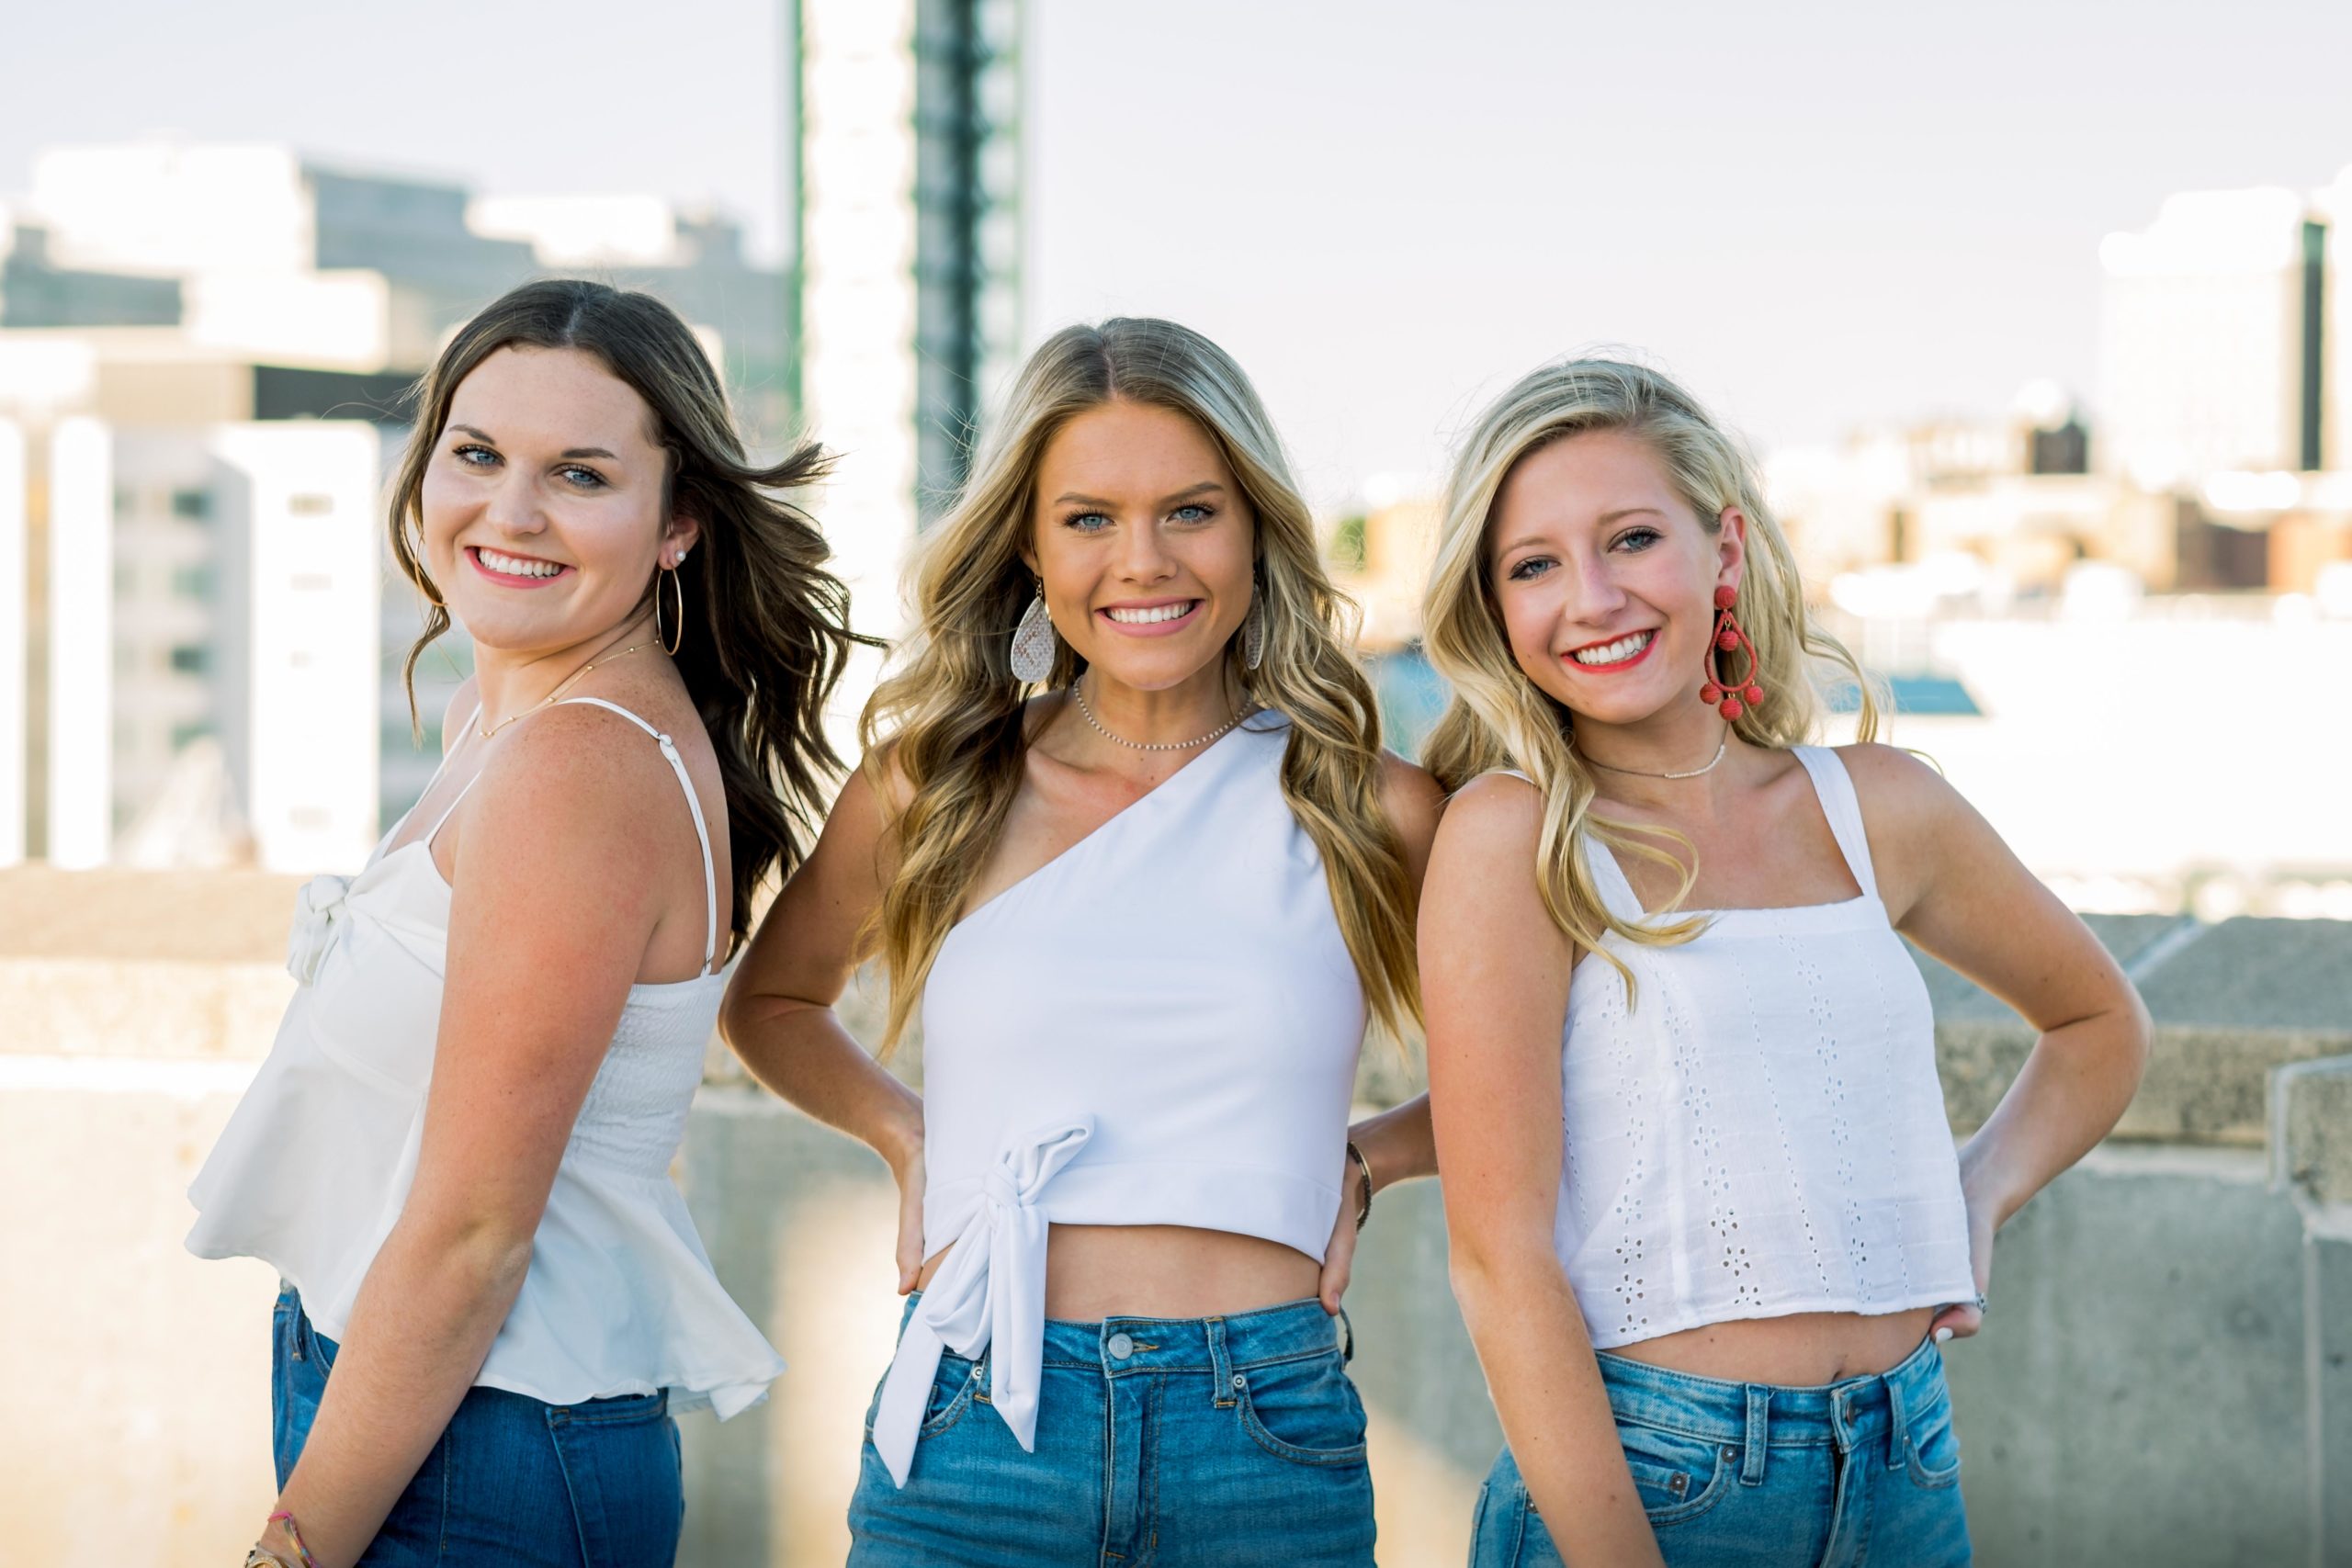 knoxville group senior session on top of a parking garage with a beautiful skyline in the background